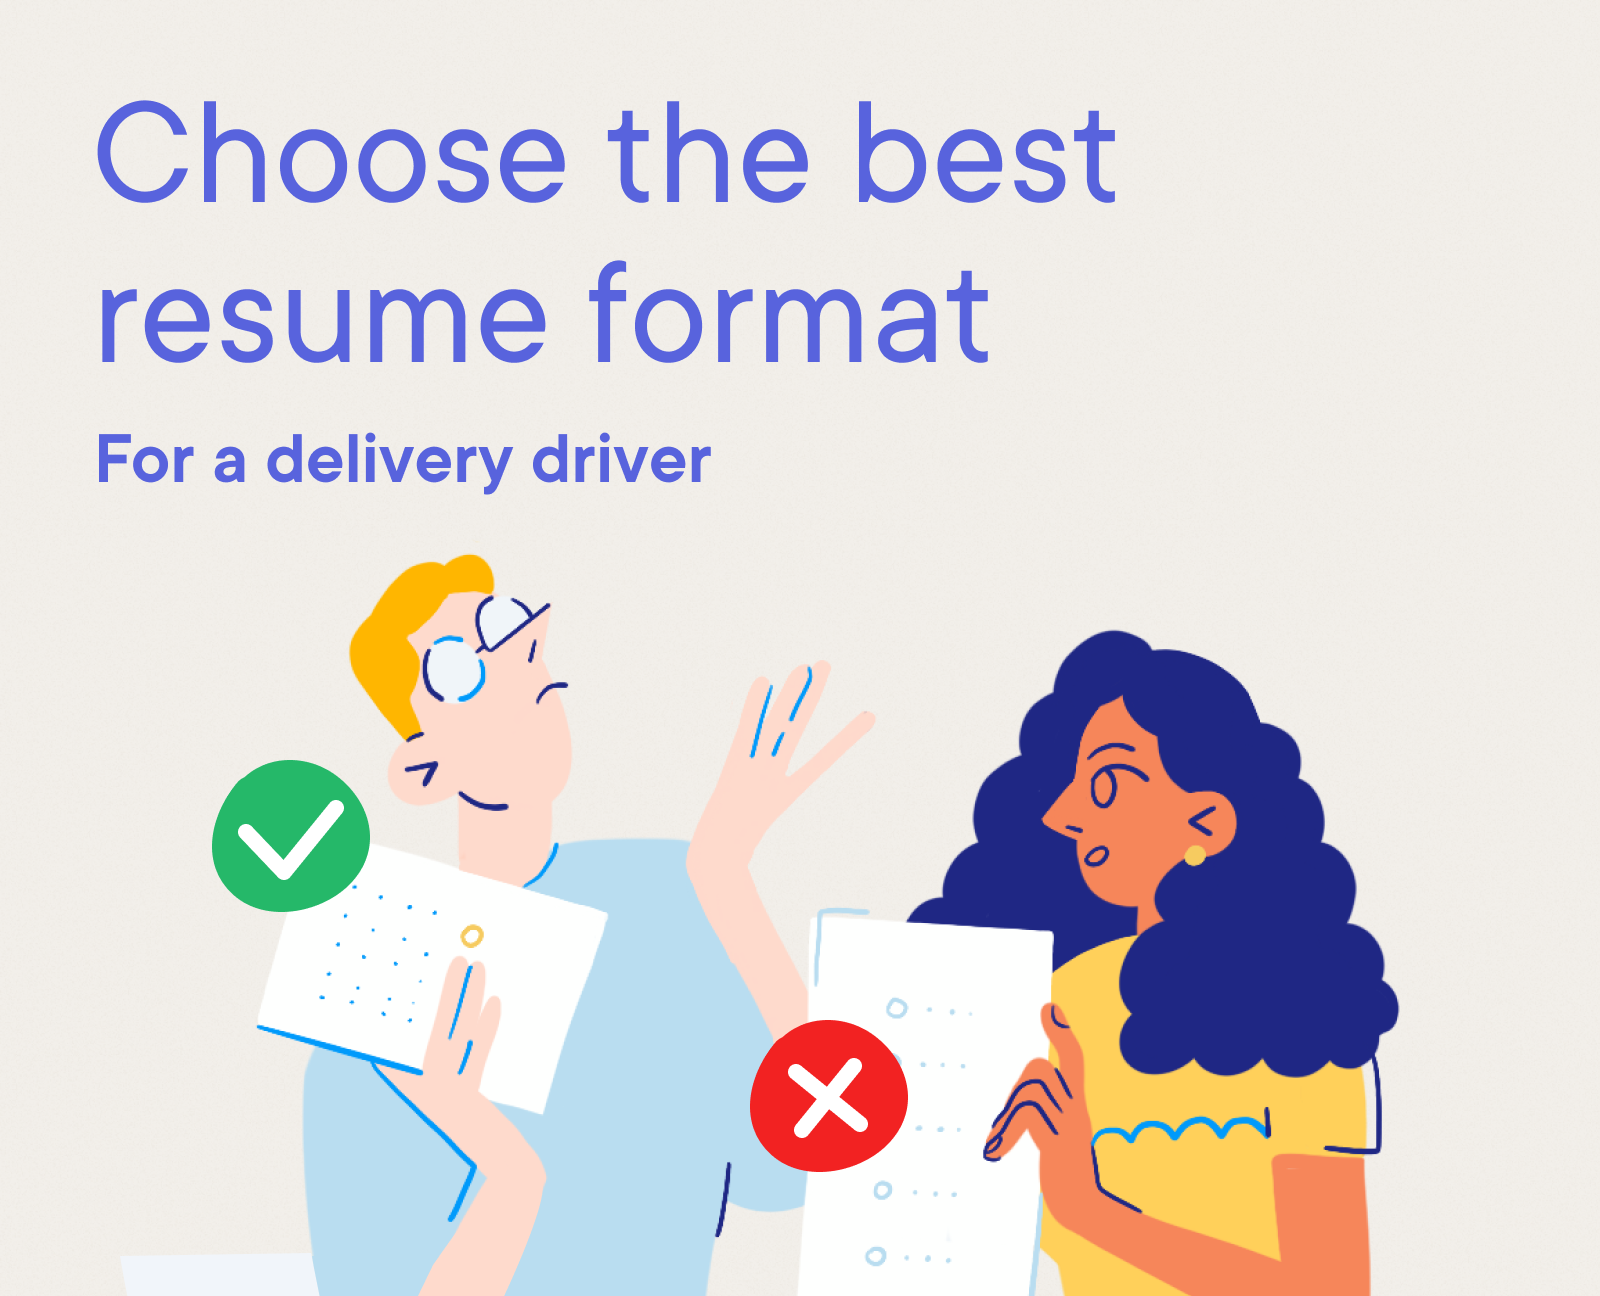 Delivery Driver - Choose the best resume format